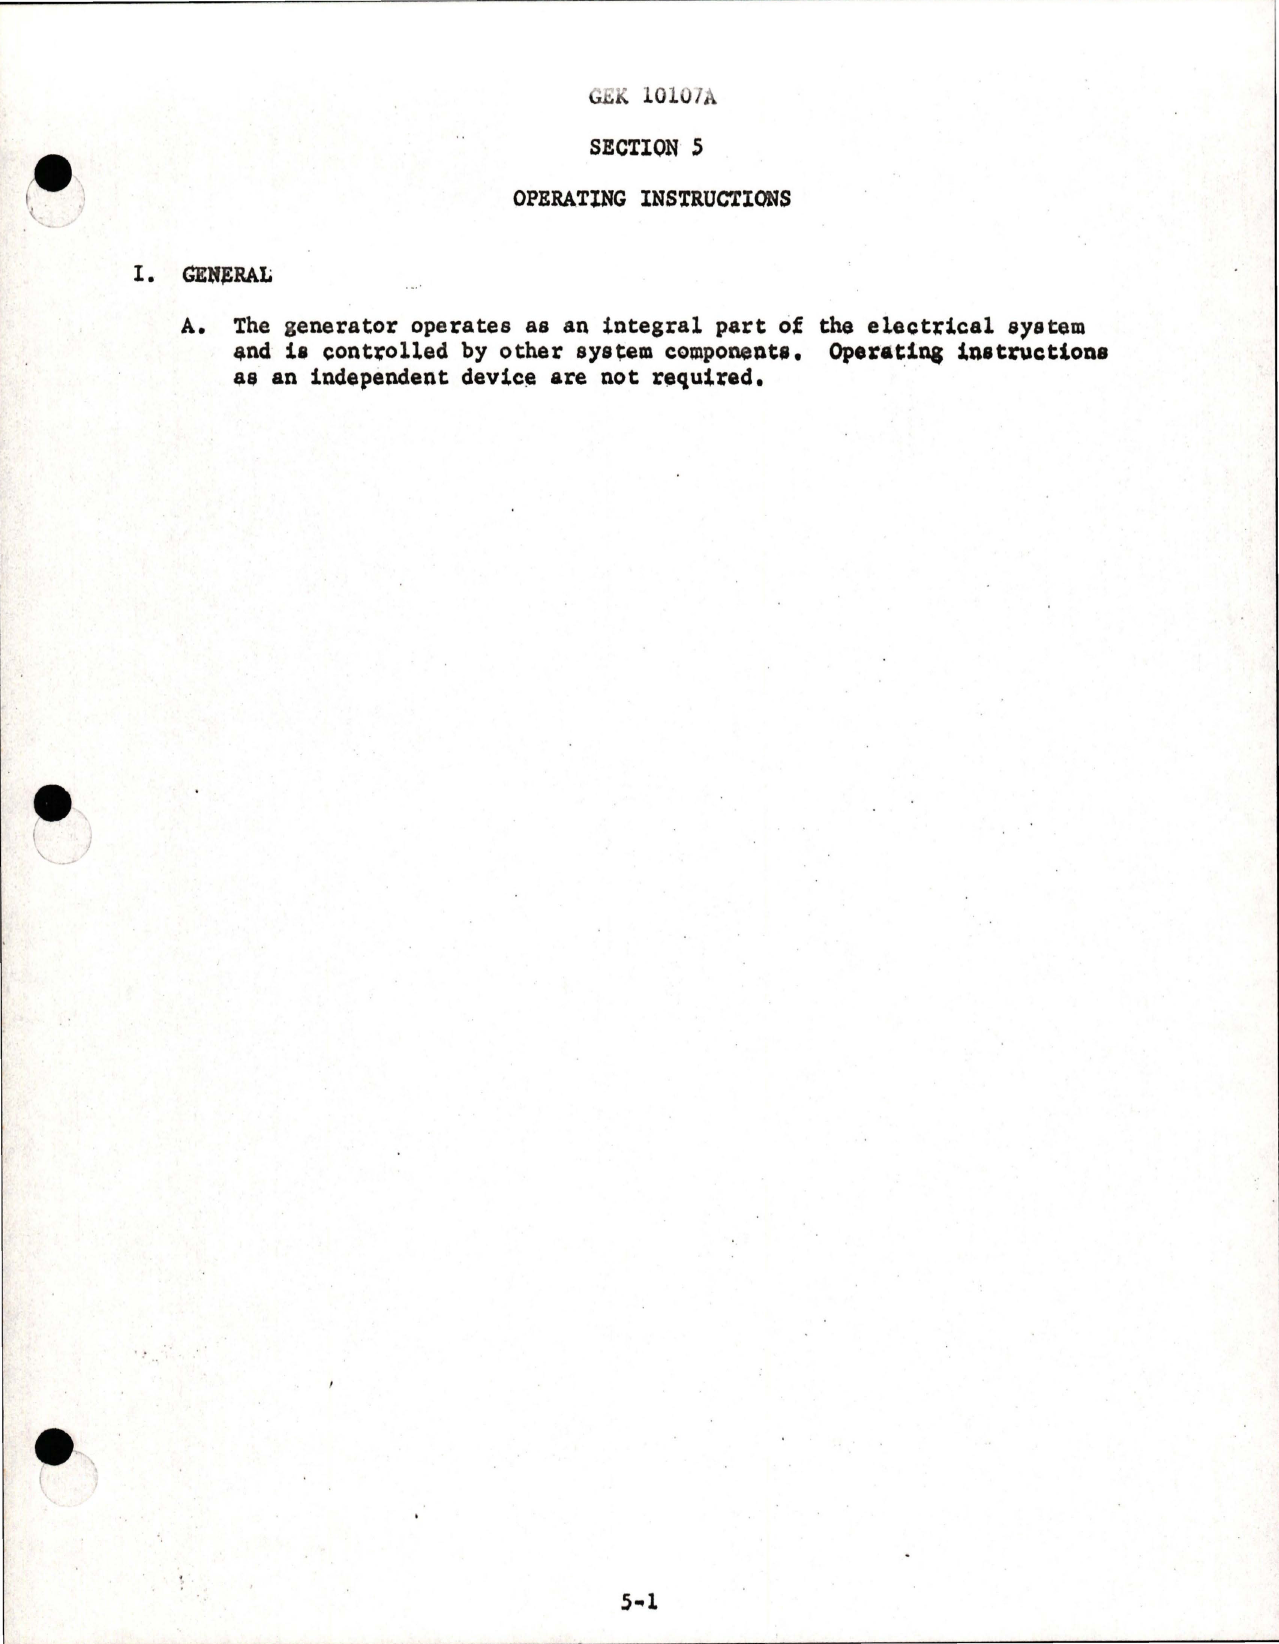 Sample page 9 from AirCorps Library document: Instructions for Aircraft A-C Generator - Models 2CM353C1D, 2CM353C1F, 2CM353C1H, and 2CM353C1J